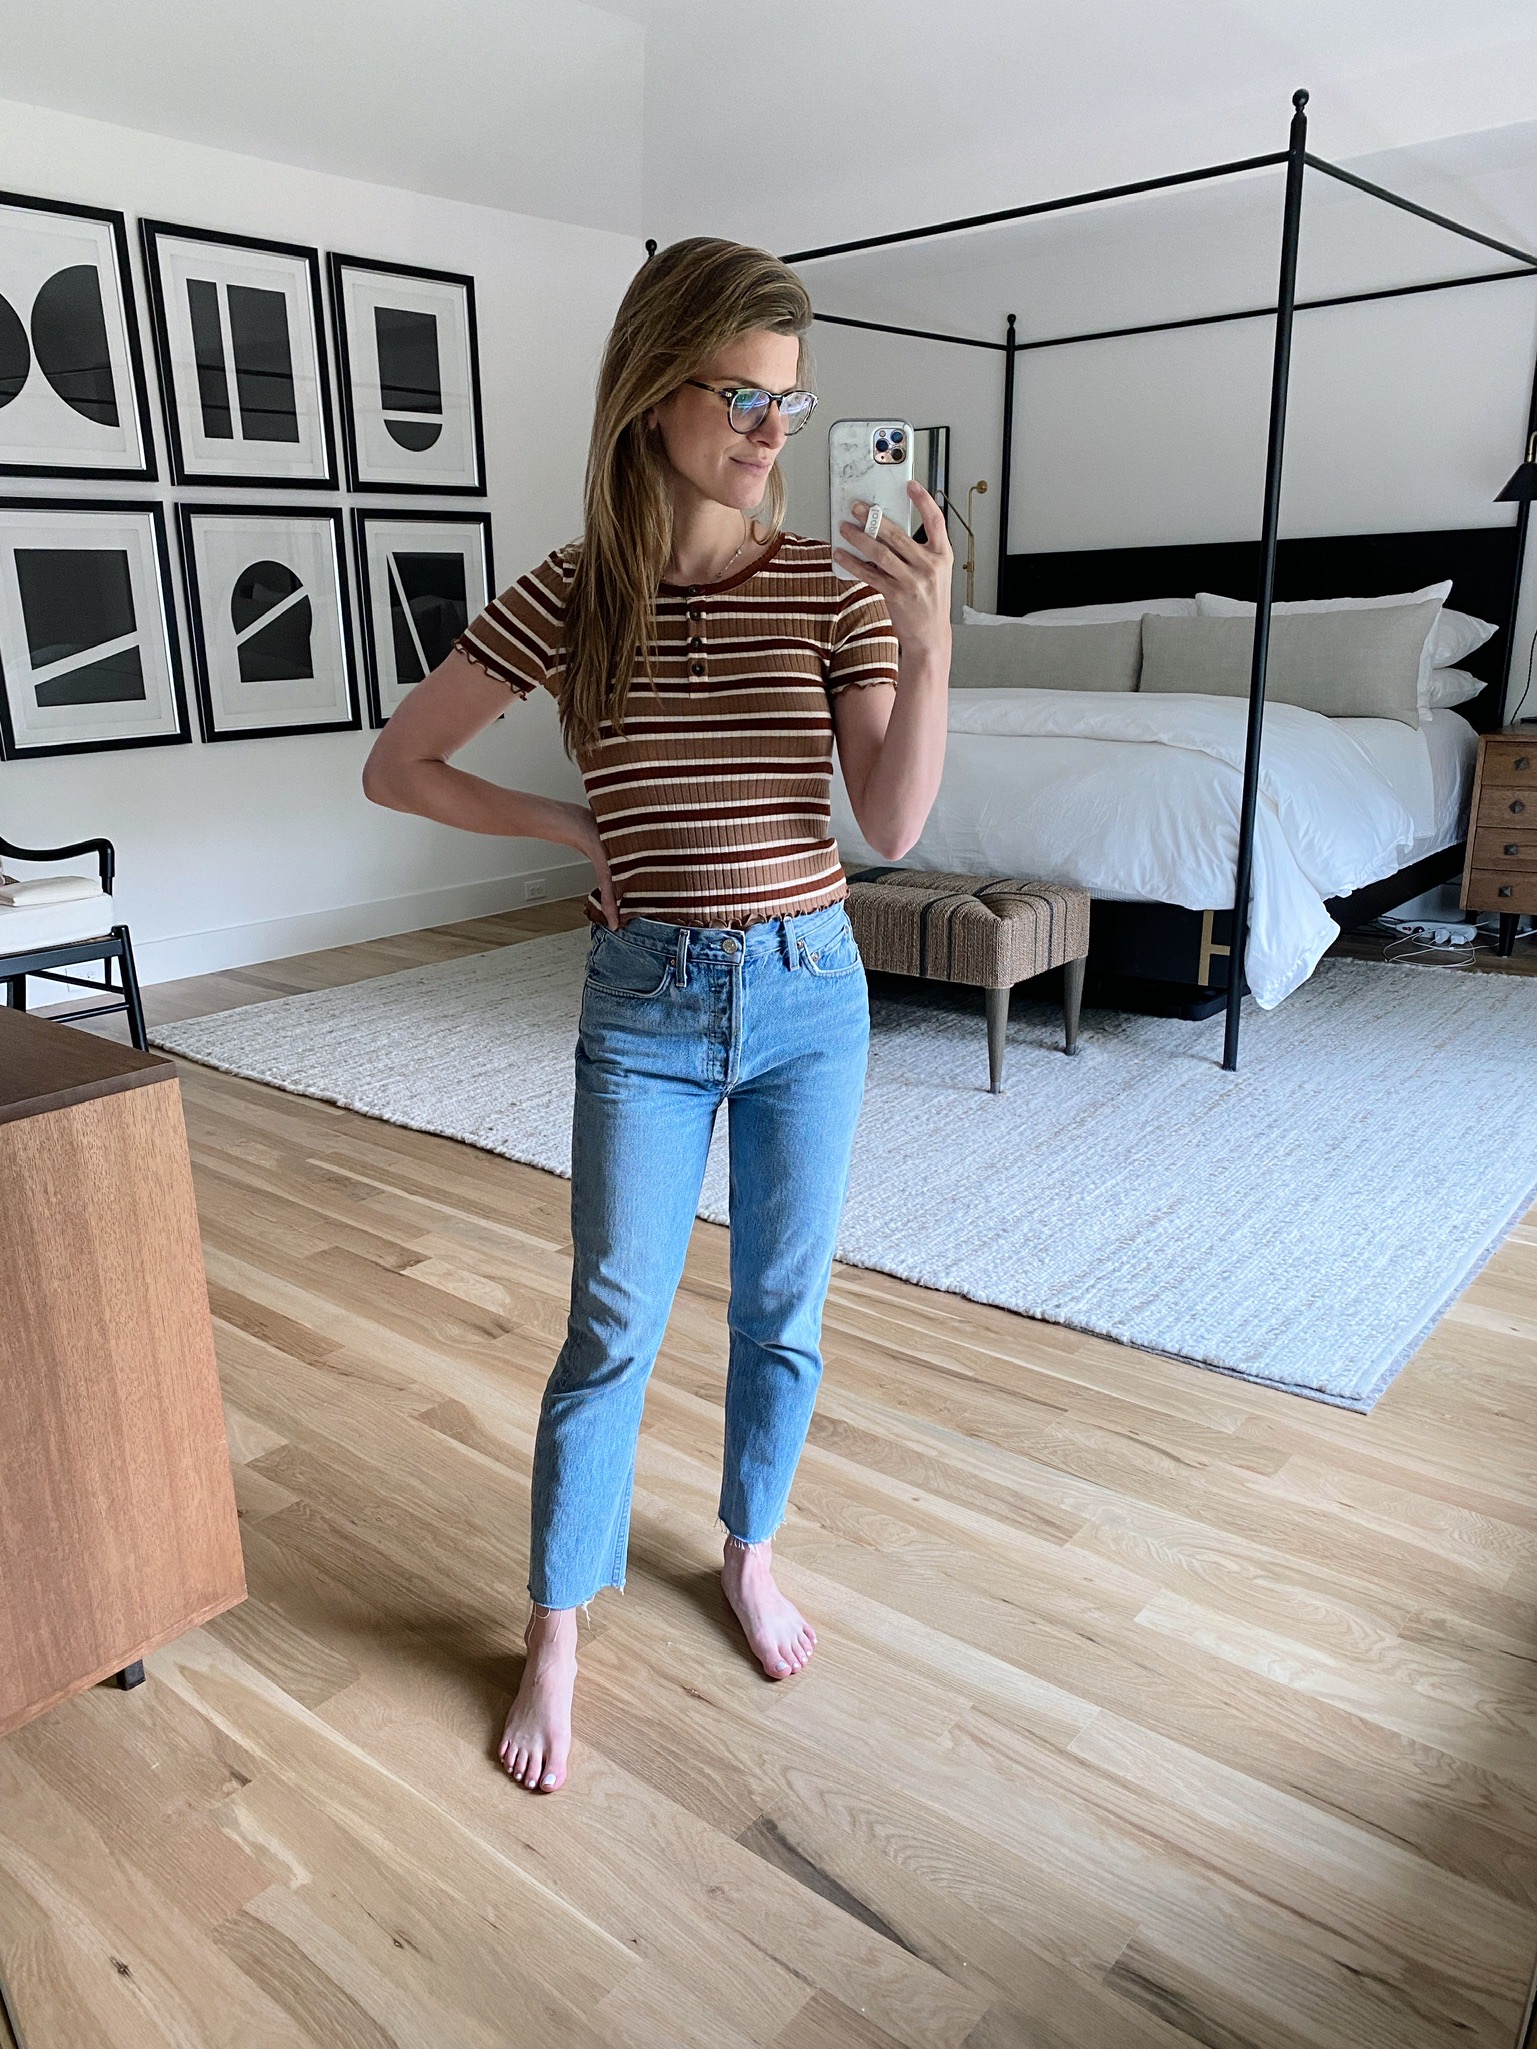 Brighton Butler in striped t-shirt and jeans